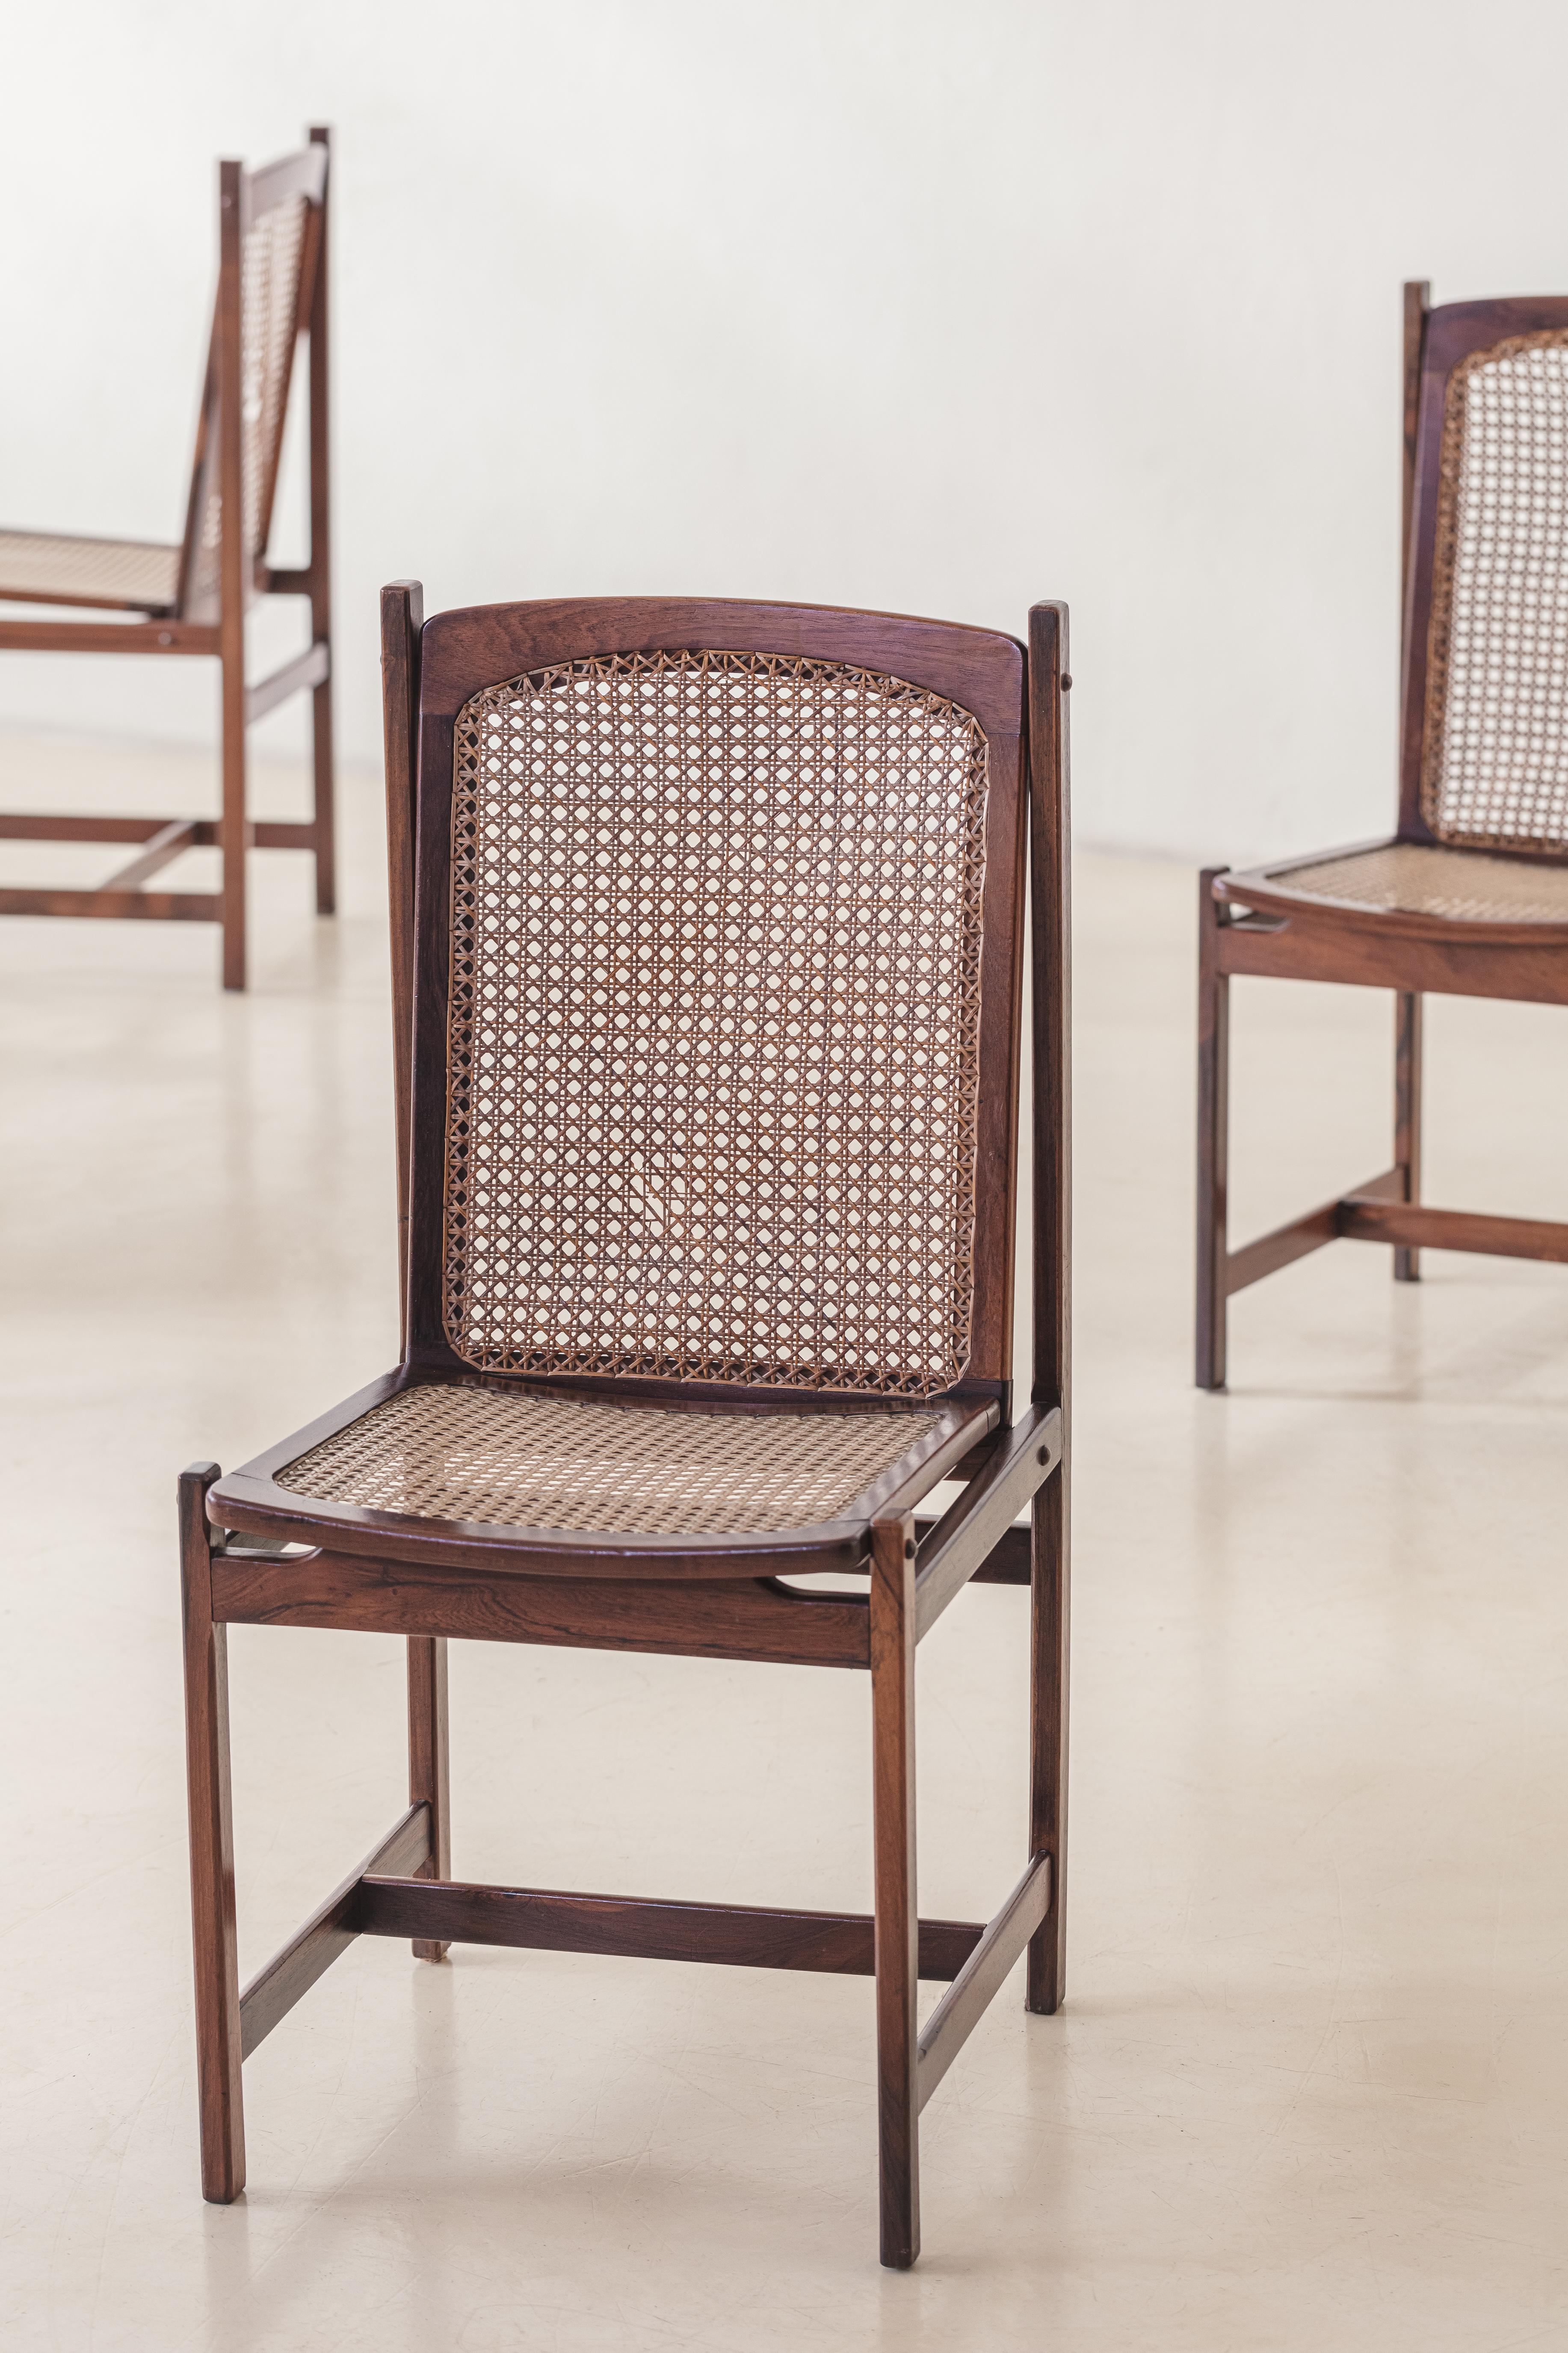 Woven Celina Decorações Set of Six Dining Chairs, Rosewood and Cane, Midcentury 1960s For Sale